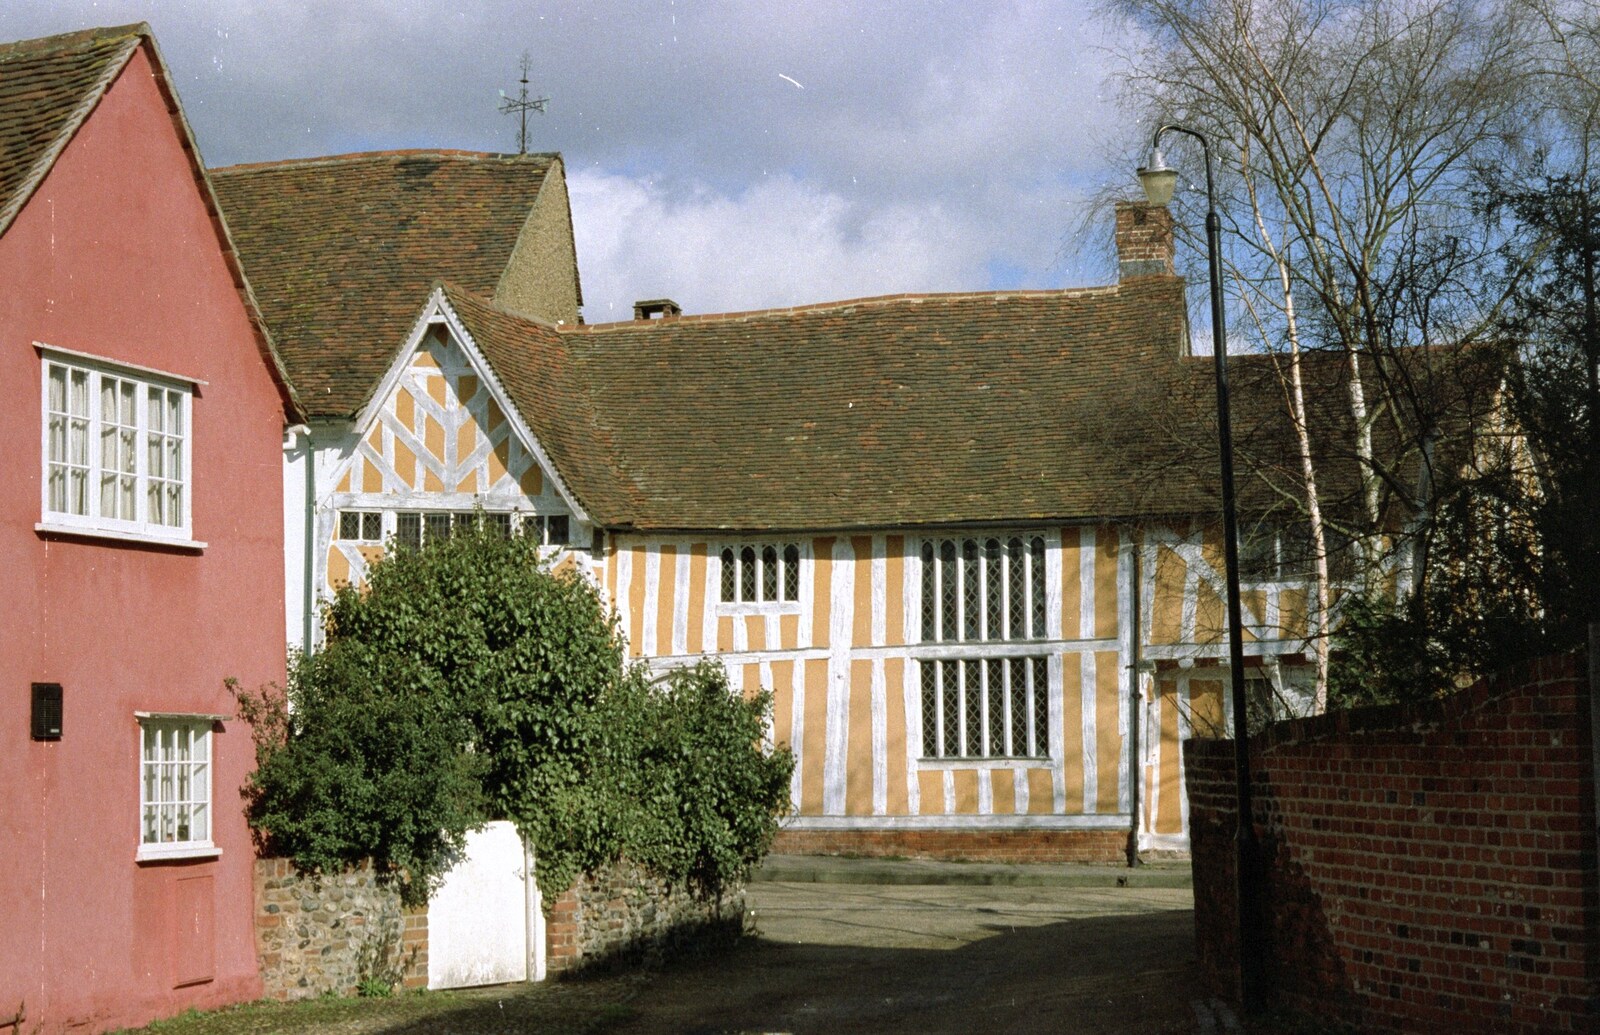 Another view of the orange house from Mother and Mike Visit, Lavenham, Suffolk - 14th April 1996